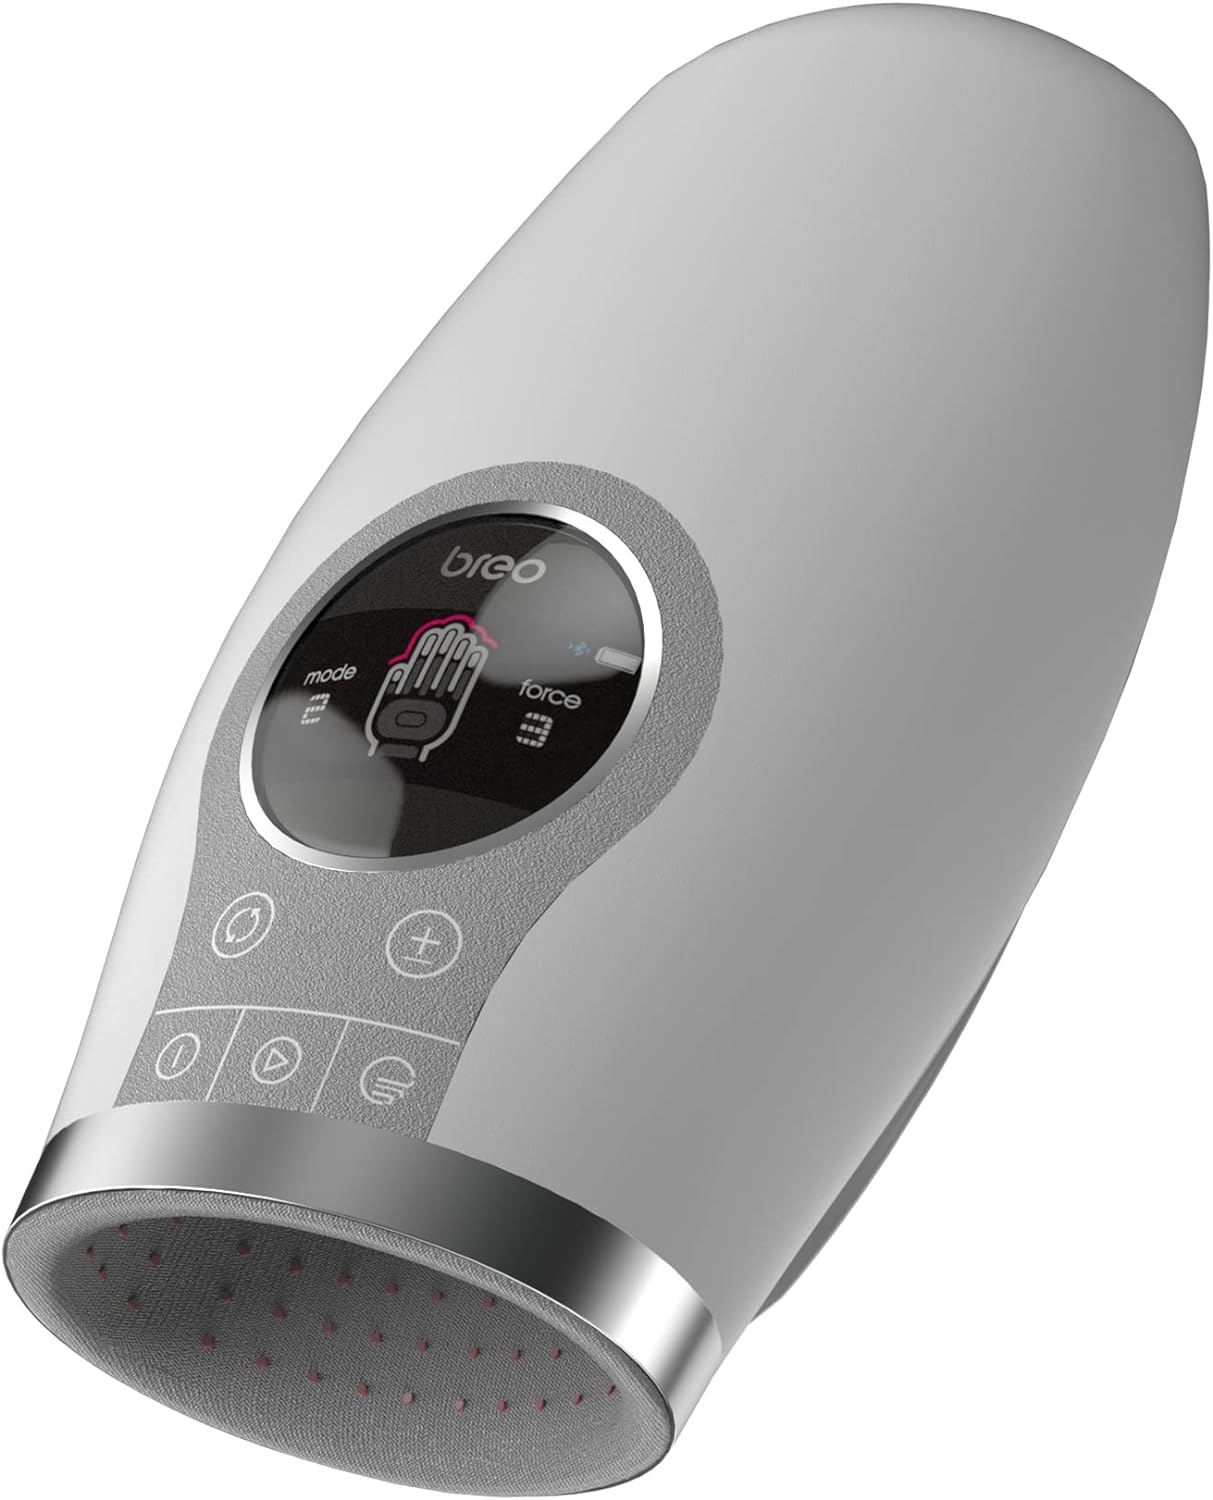 Breo WOWOS Hand Massager with Heating Function, APP Control, Cordless,